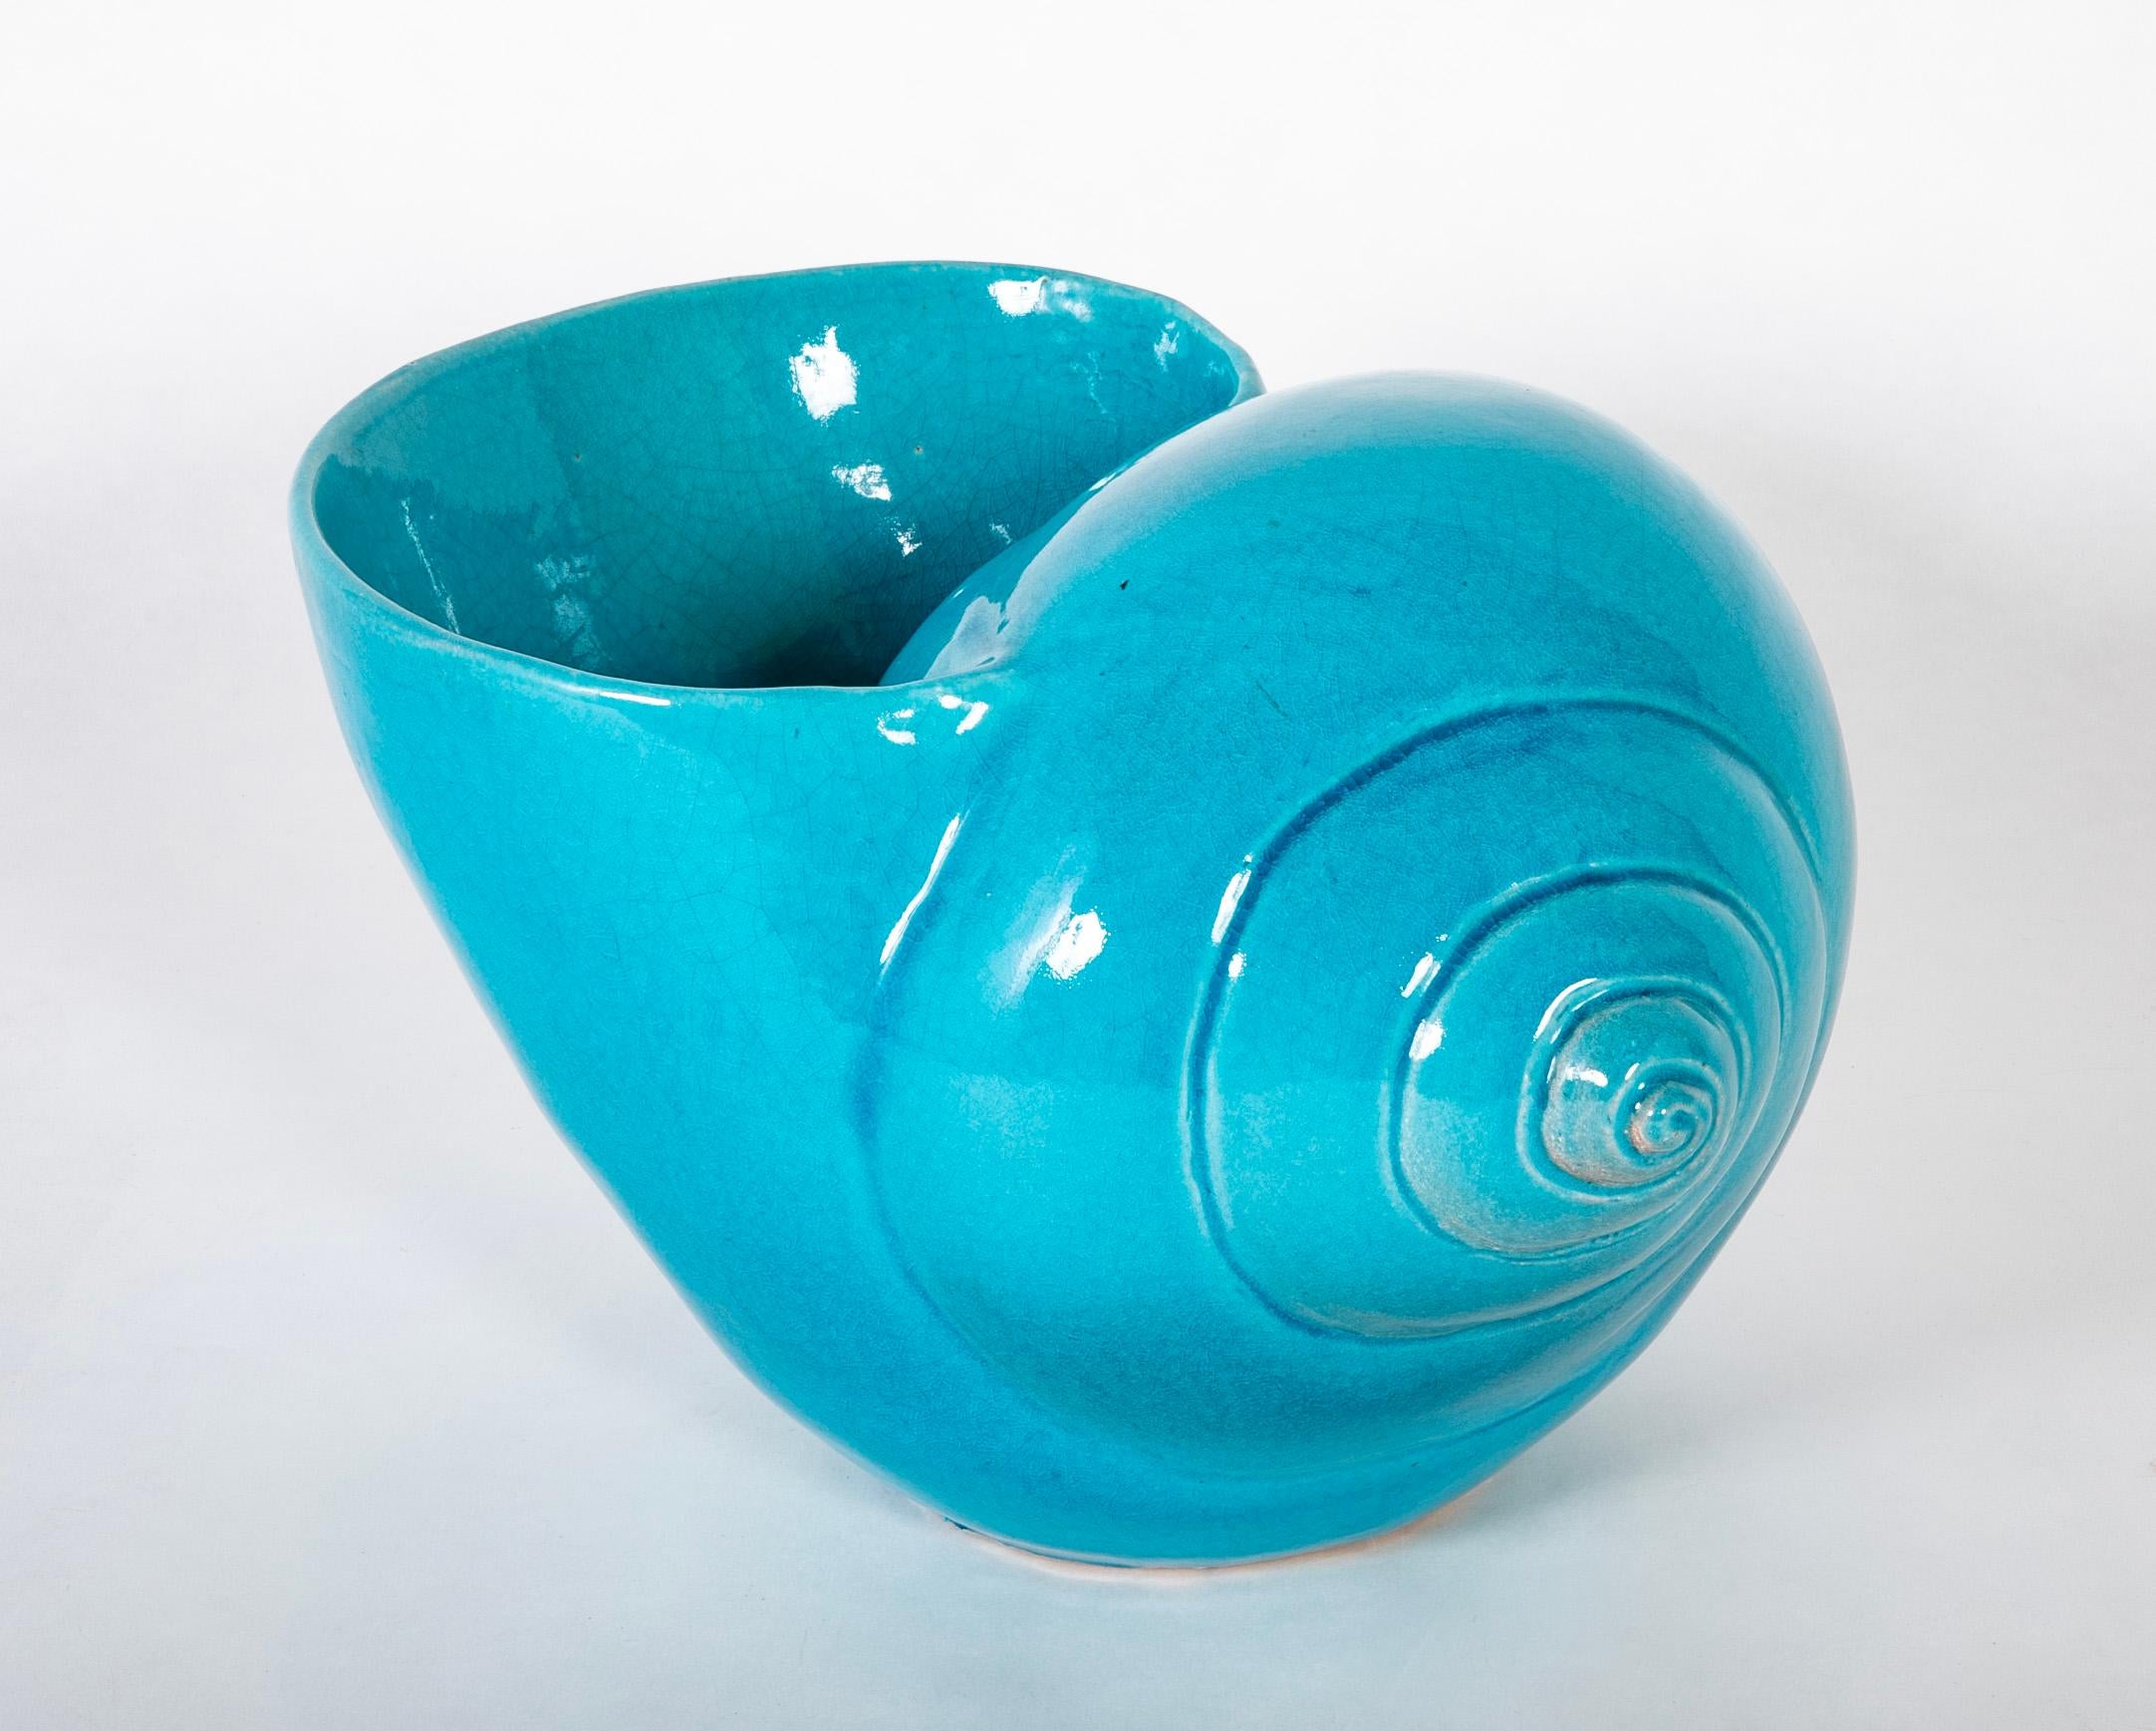 Turquoise Blue Glazed Sea Shell Vase Jardiniere Planter, Large Scale For Sale 13